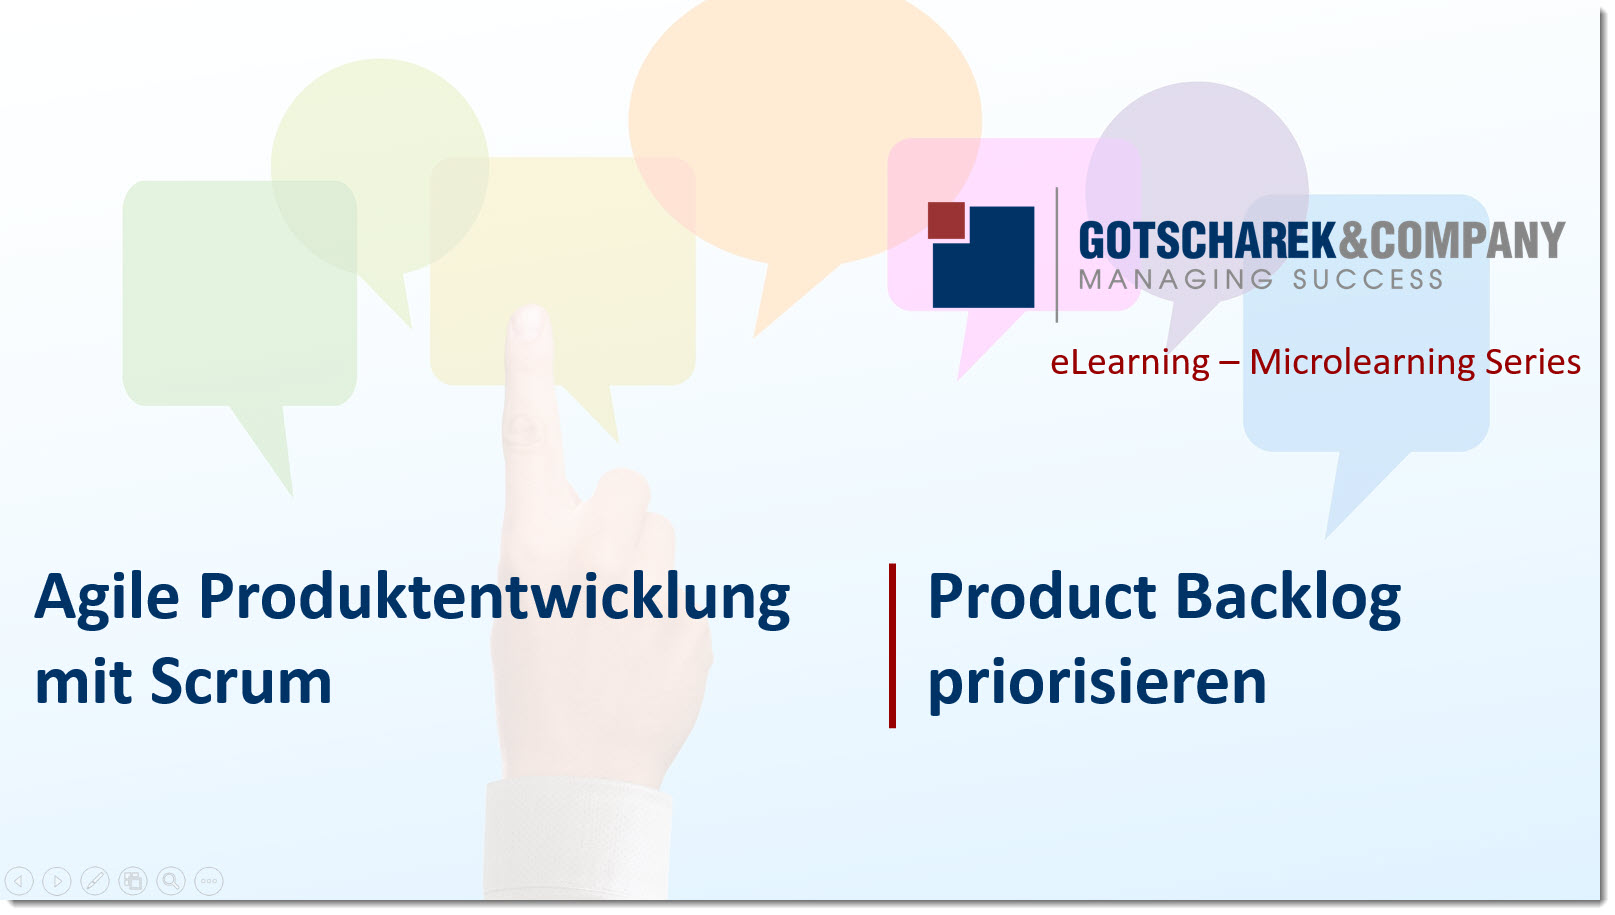 Microlearning Product Backlog priorisieren